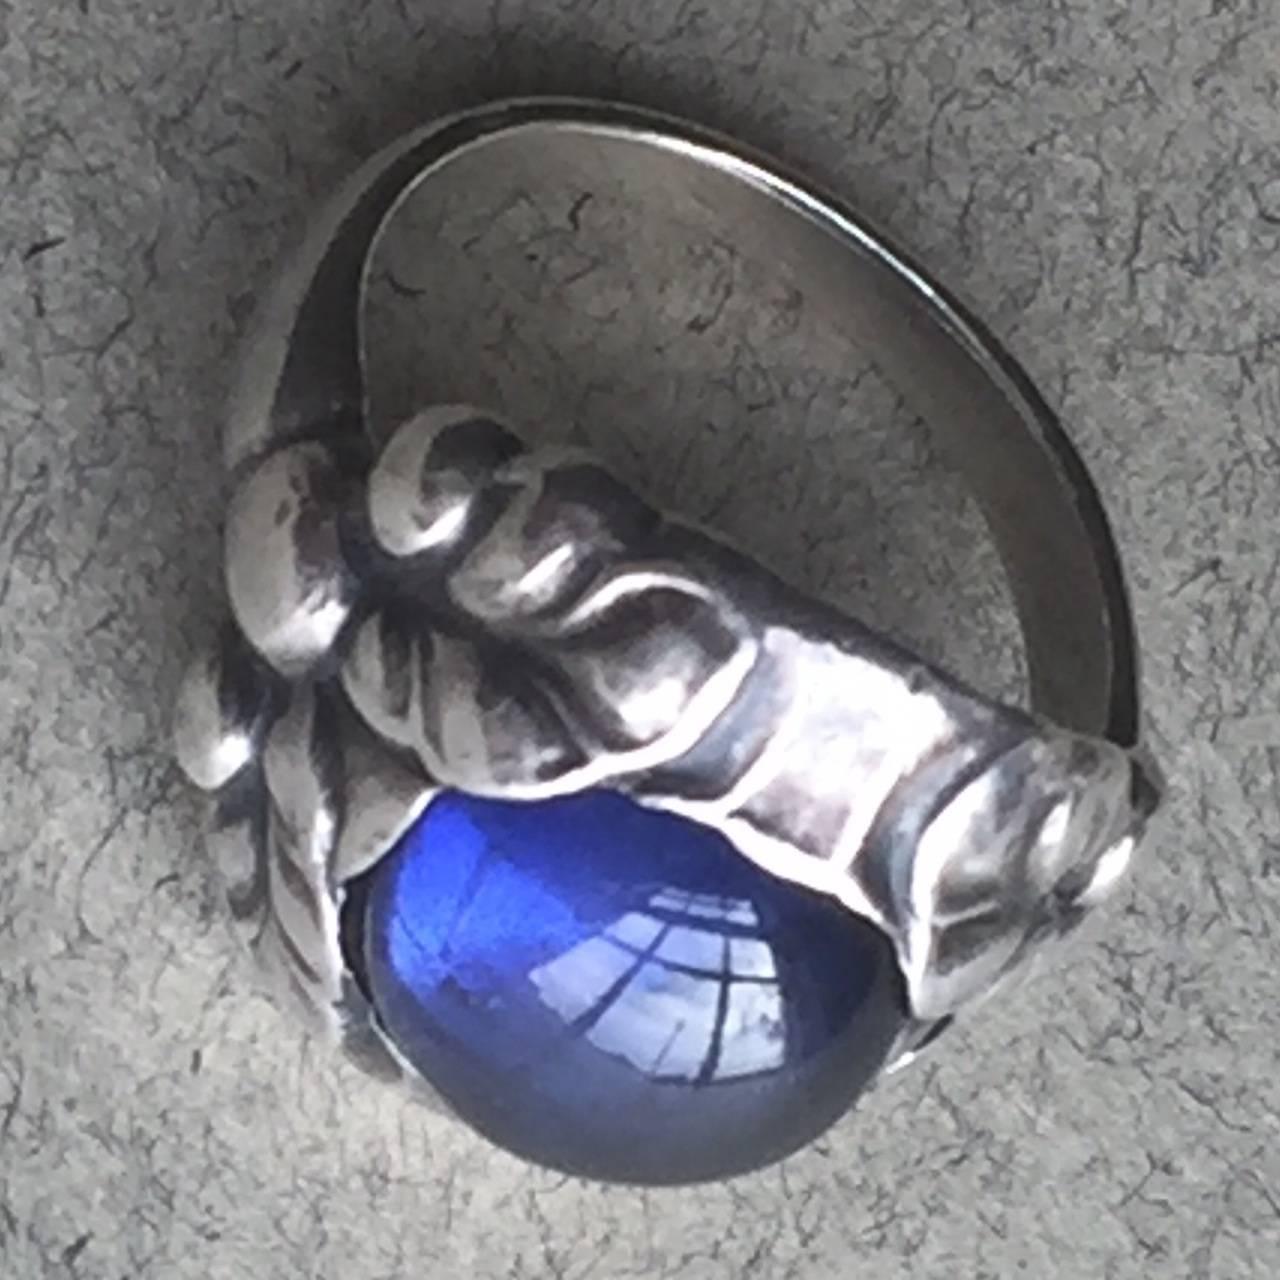 Georg Jensen Sterling Silver Ring No. 11b with Synthetic Sapphire.

Art nouveau sterling silver ring that features a vibrant blue synthetic sapphire gemstone in the center of a leaf pattern setting. 

Size 6 ring in excellent condition with